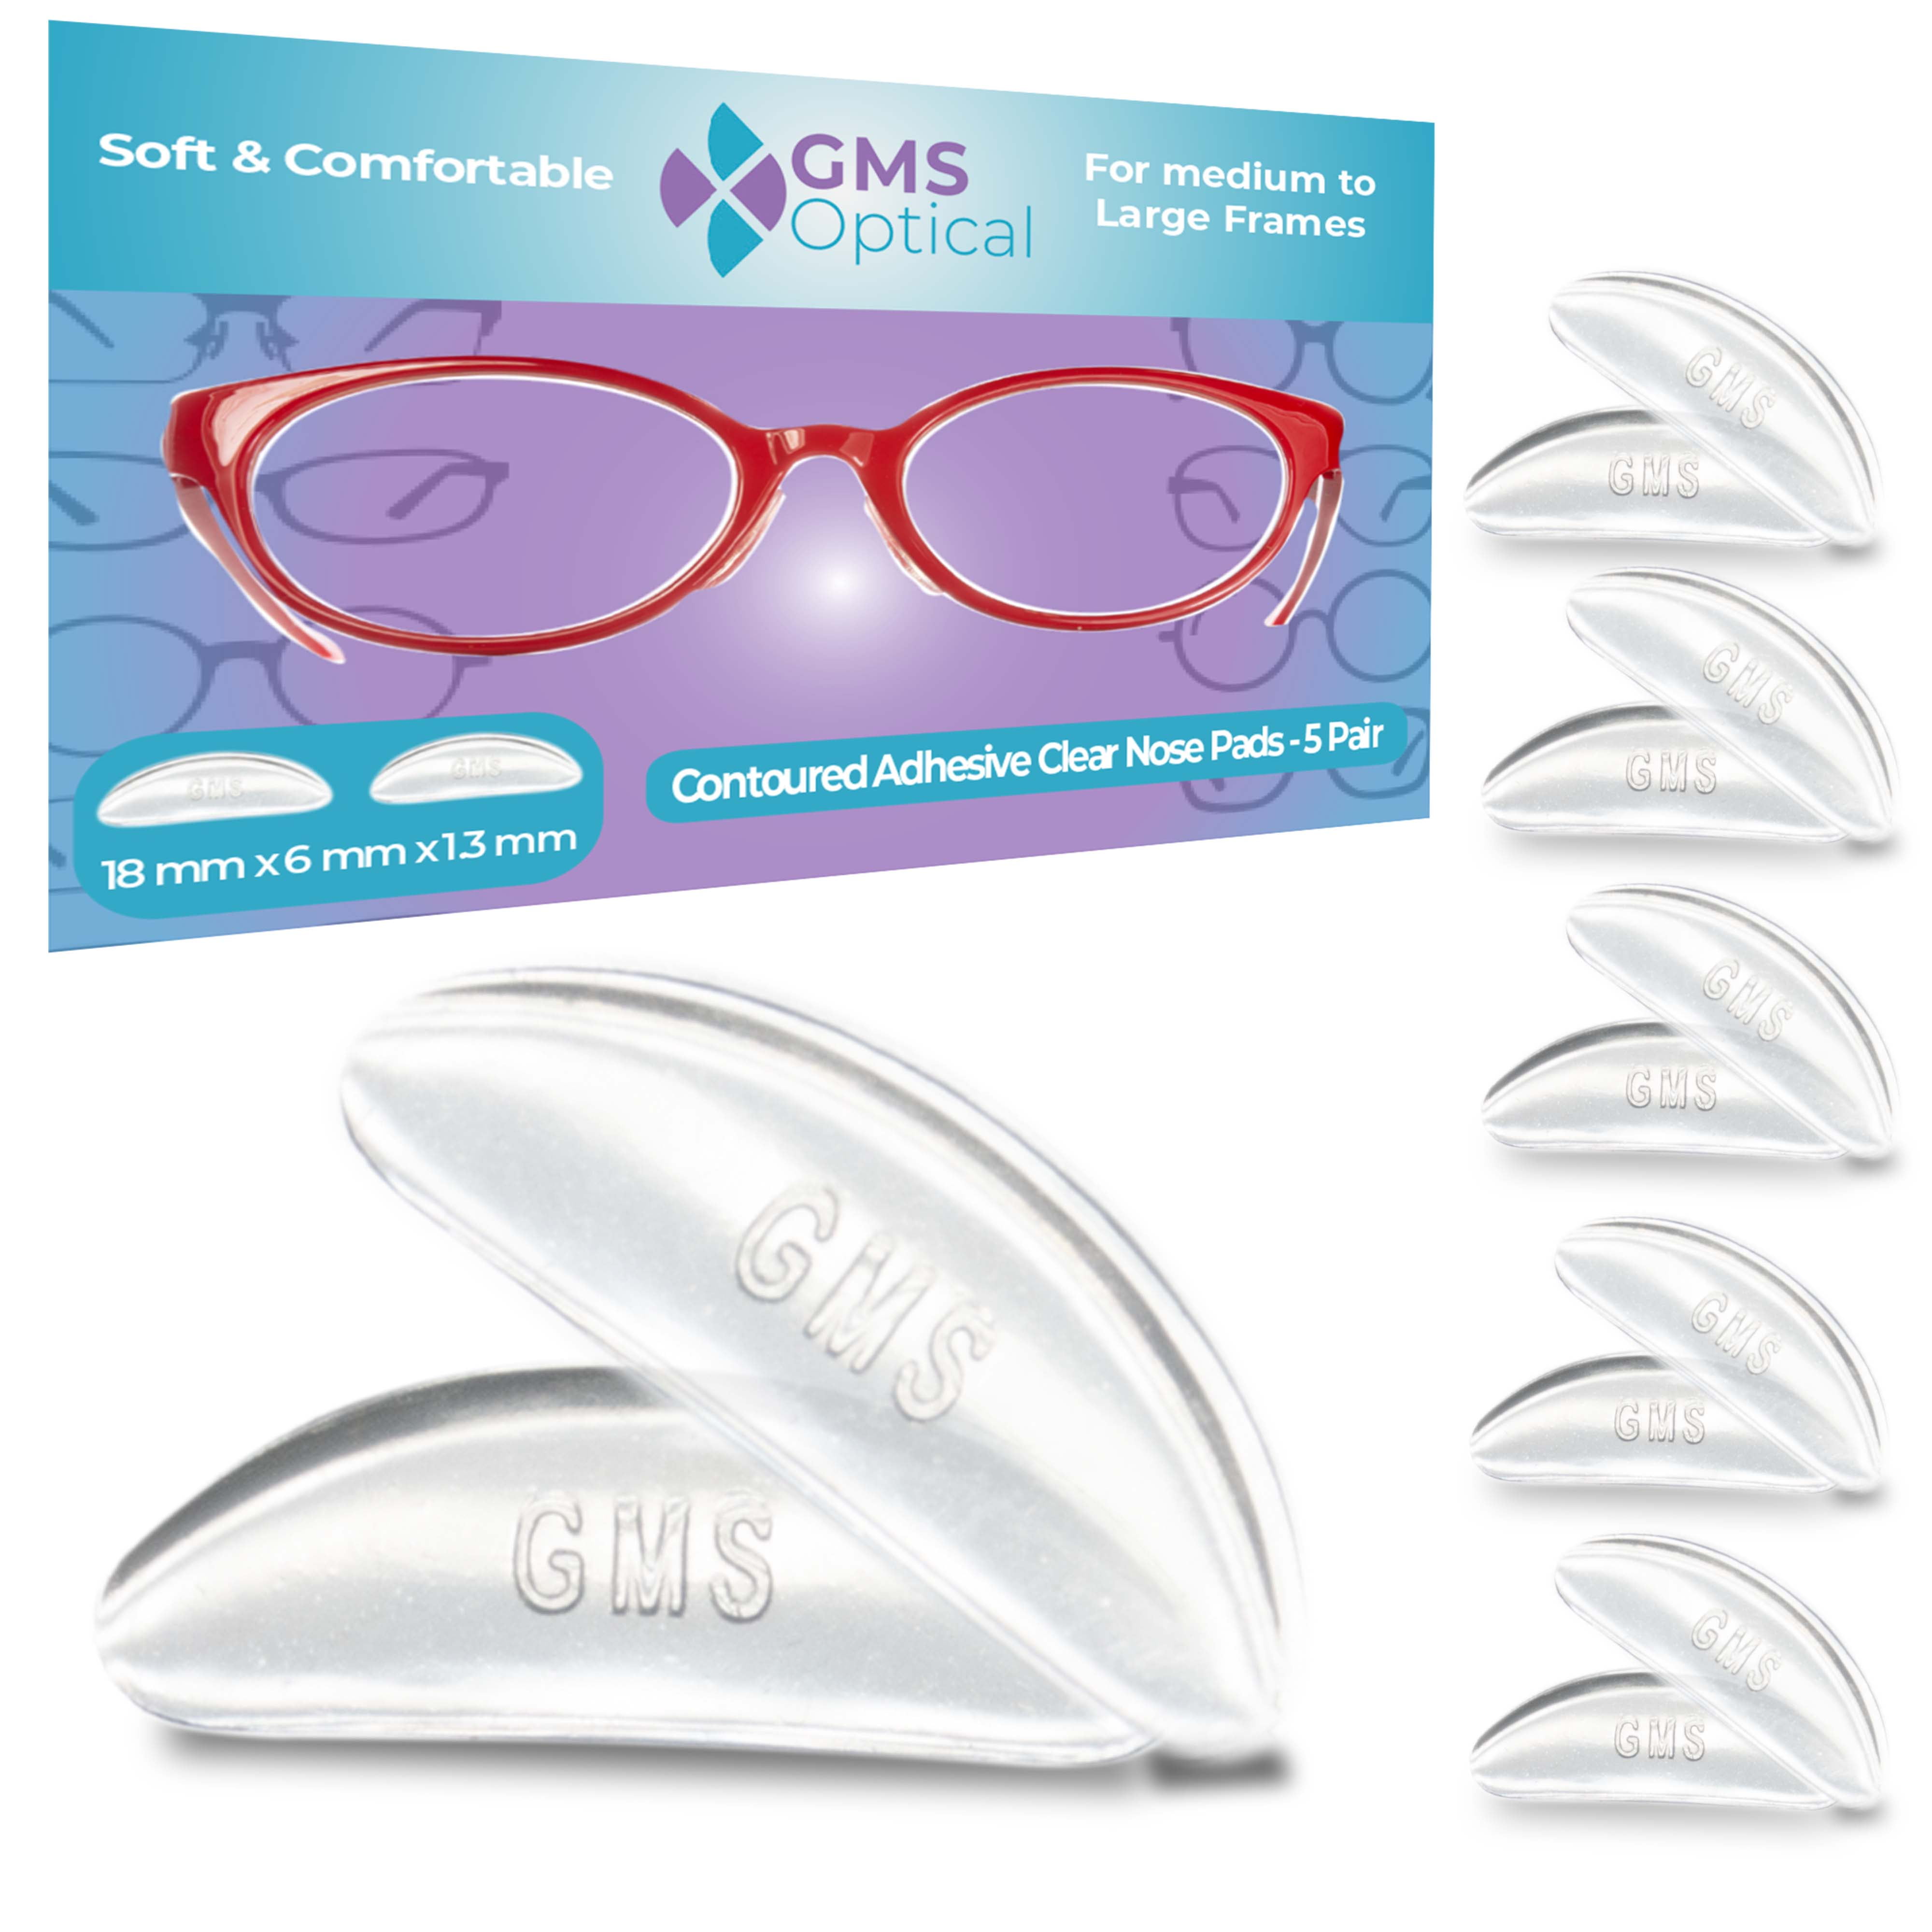 GMS Optical® 1.3mm Ultra-Thin Anti-Slip Adhesive Contoured Silicone  Eyeglass Nose Pads with Super Sticky Backing for Glasses, Sunglasses, and  Eye Wear